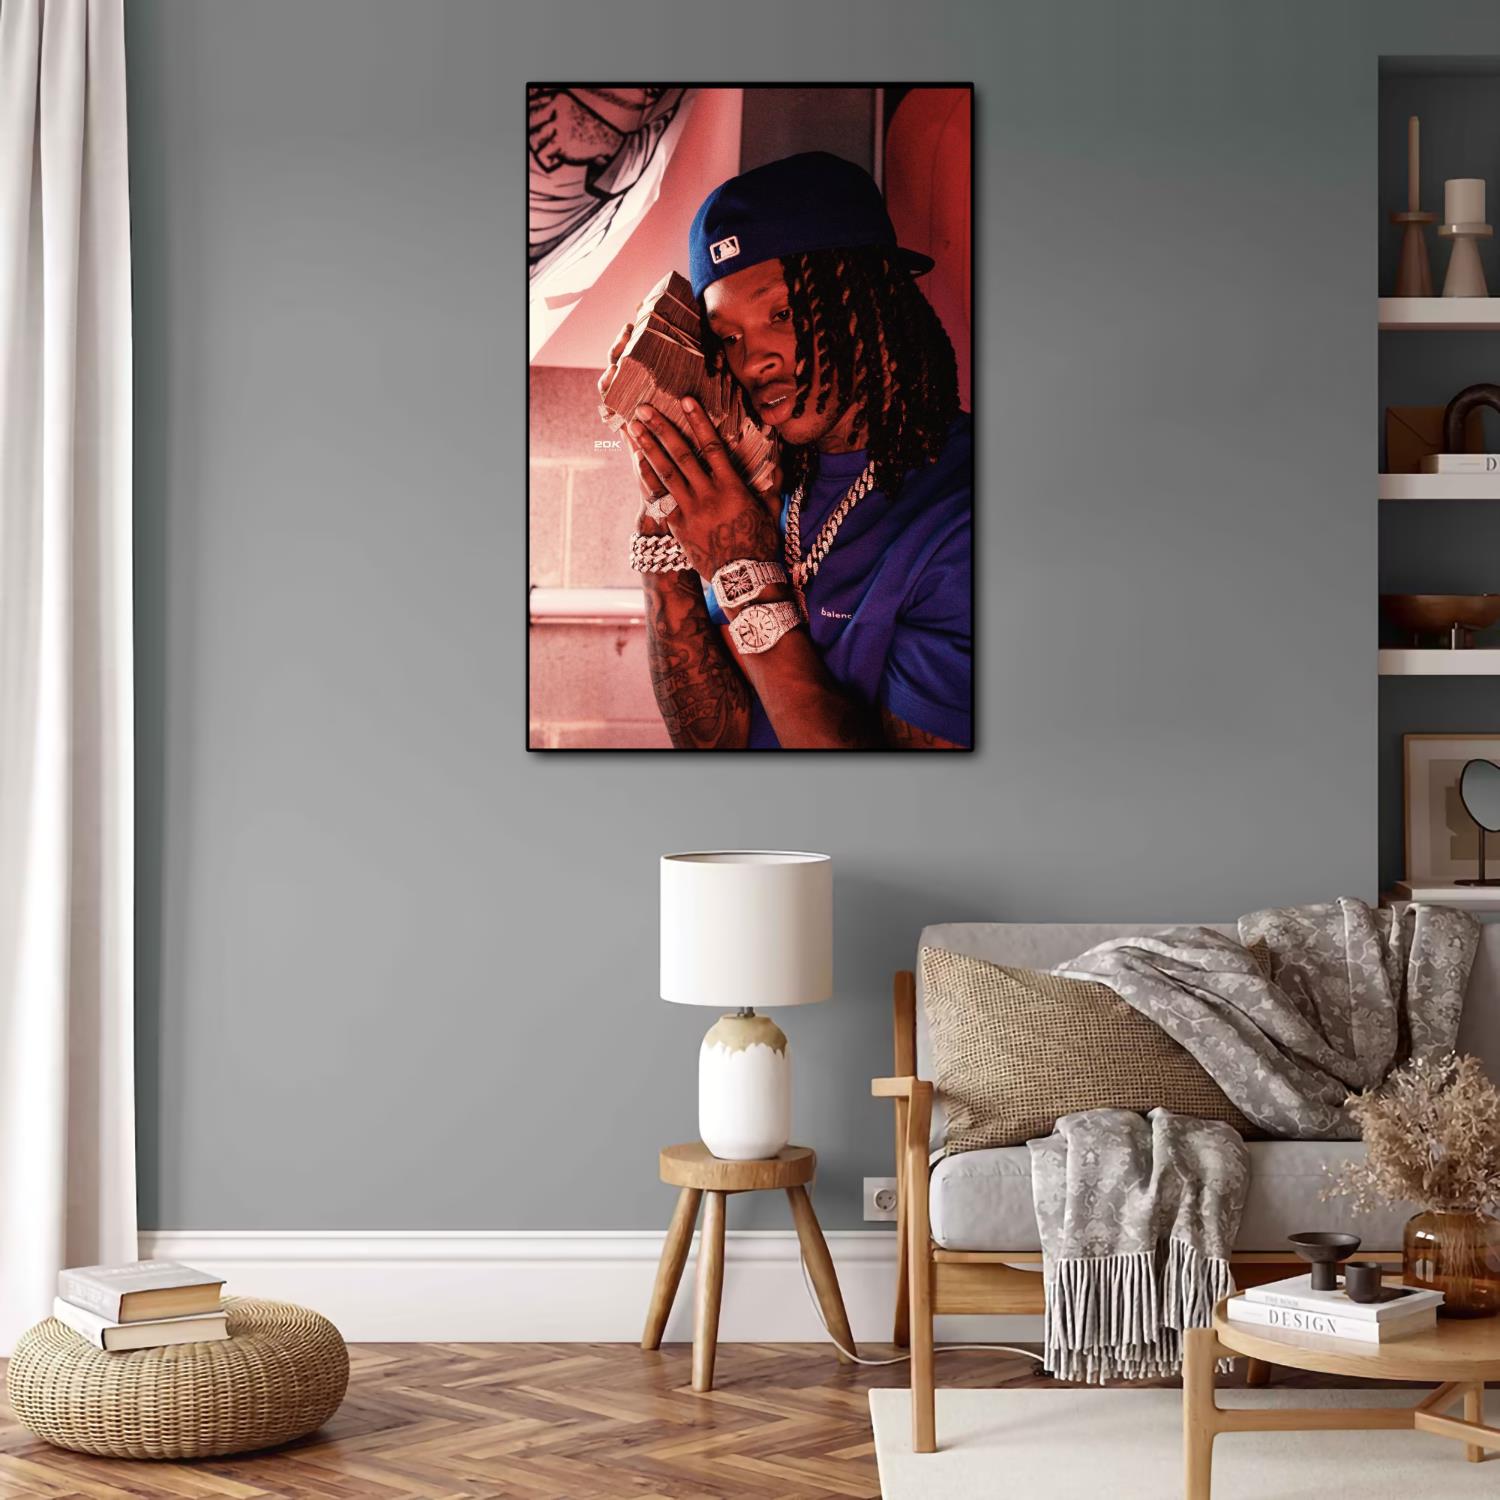 DRAGON VINES King of Rapper Poster Canvas Wall Art for Room Bedroom Hip Hop  He Grew Up as Childhood Friends With Rapper Lil Durk Poster for Wall 16x24  Inches : : Home